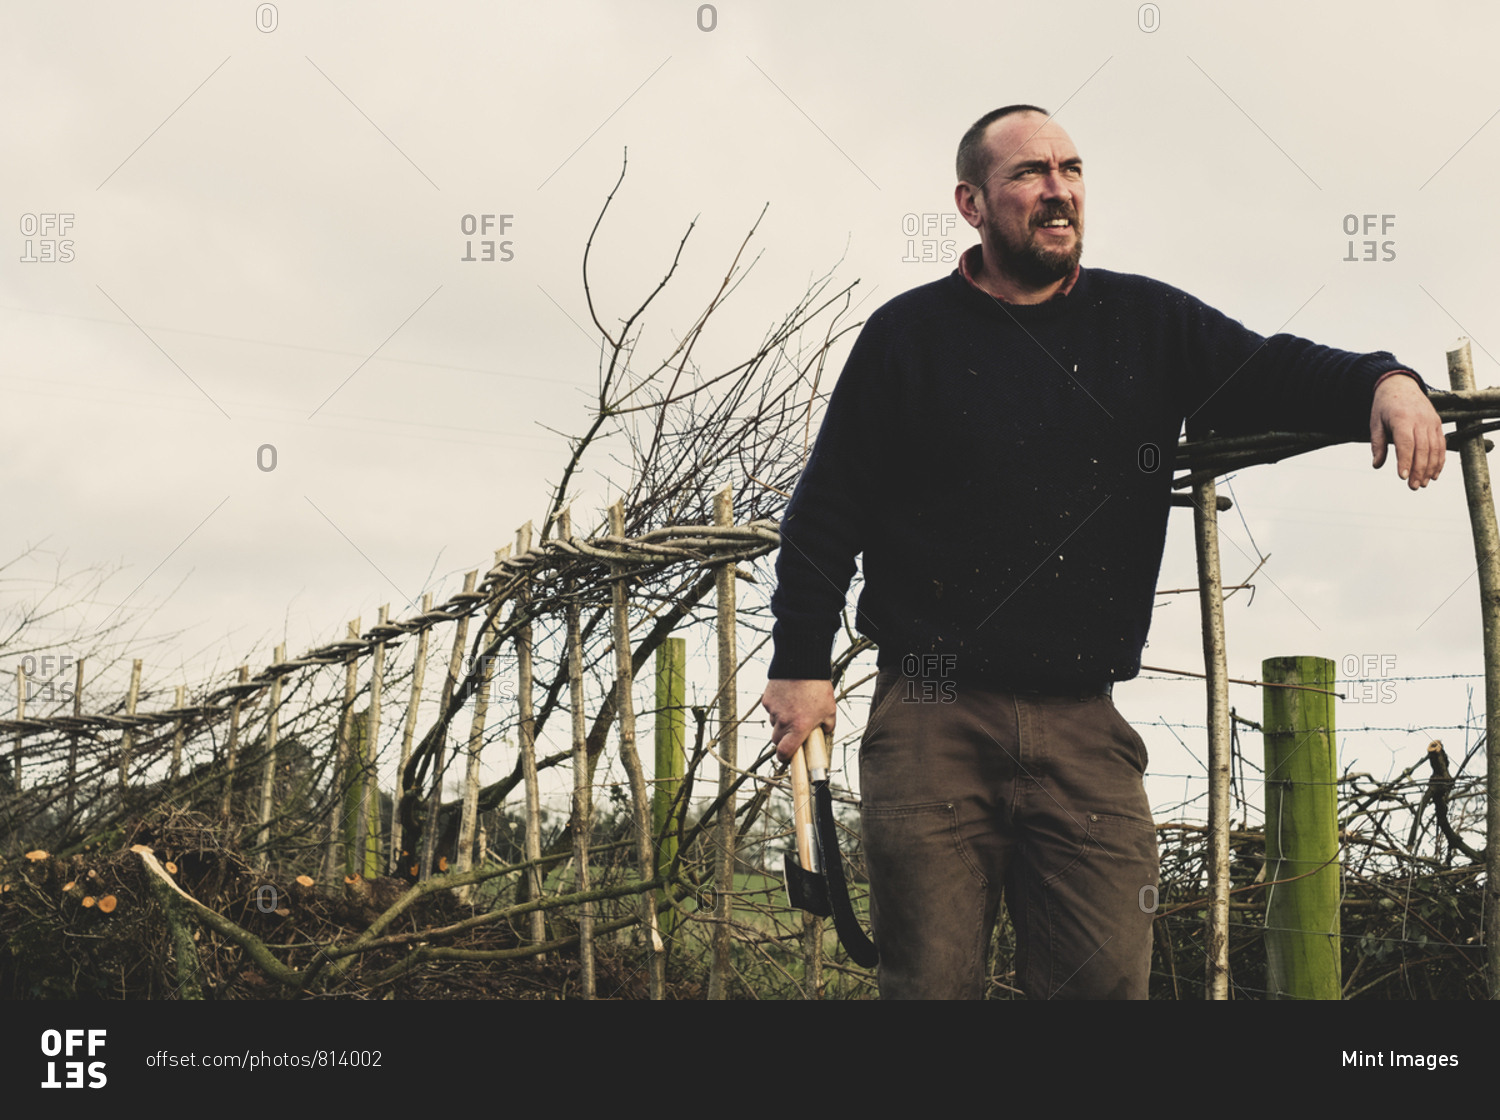 Smiling bearded man holding axe and bill hook standing next to a newly built traditional hedge.